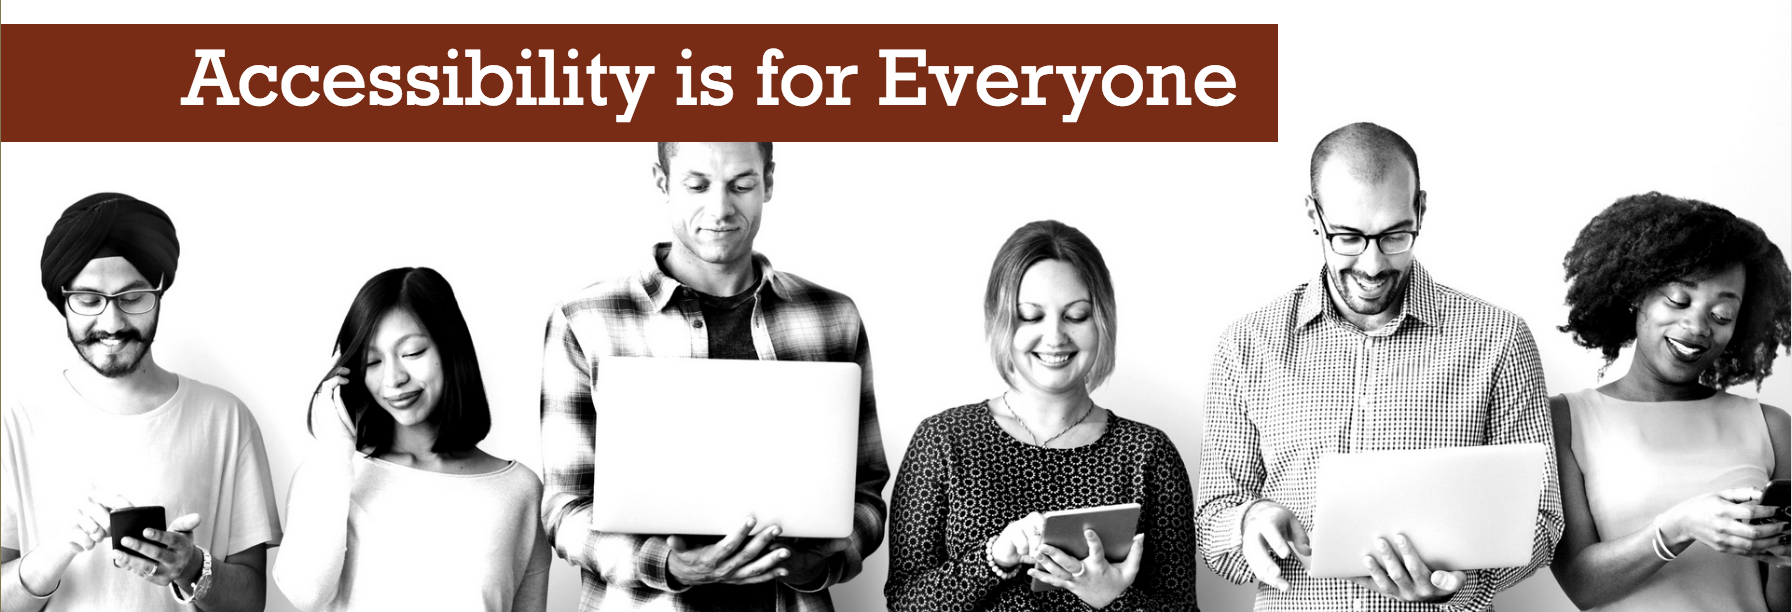 Accessibility is for everyone banner.png